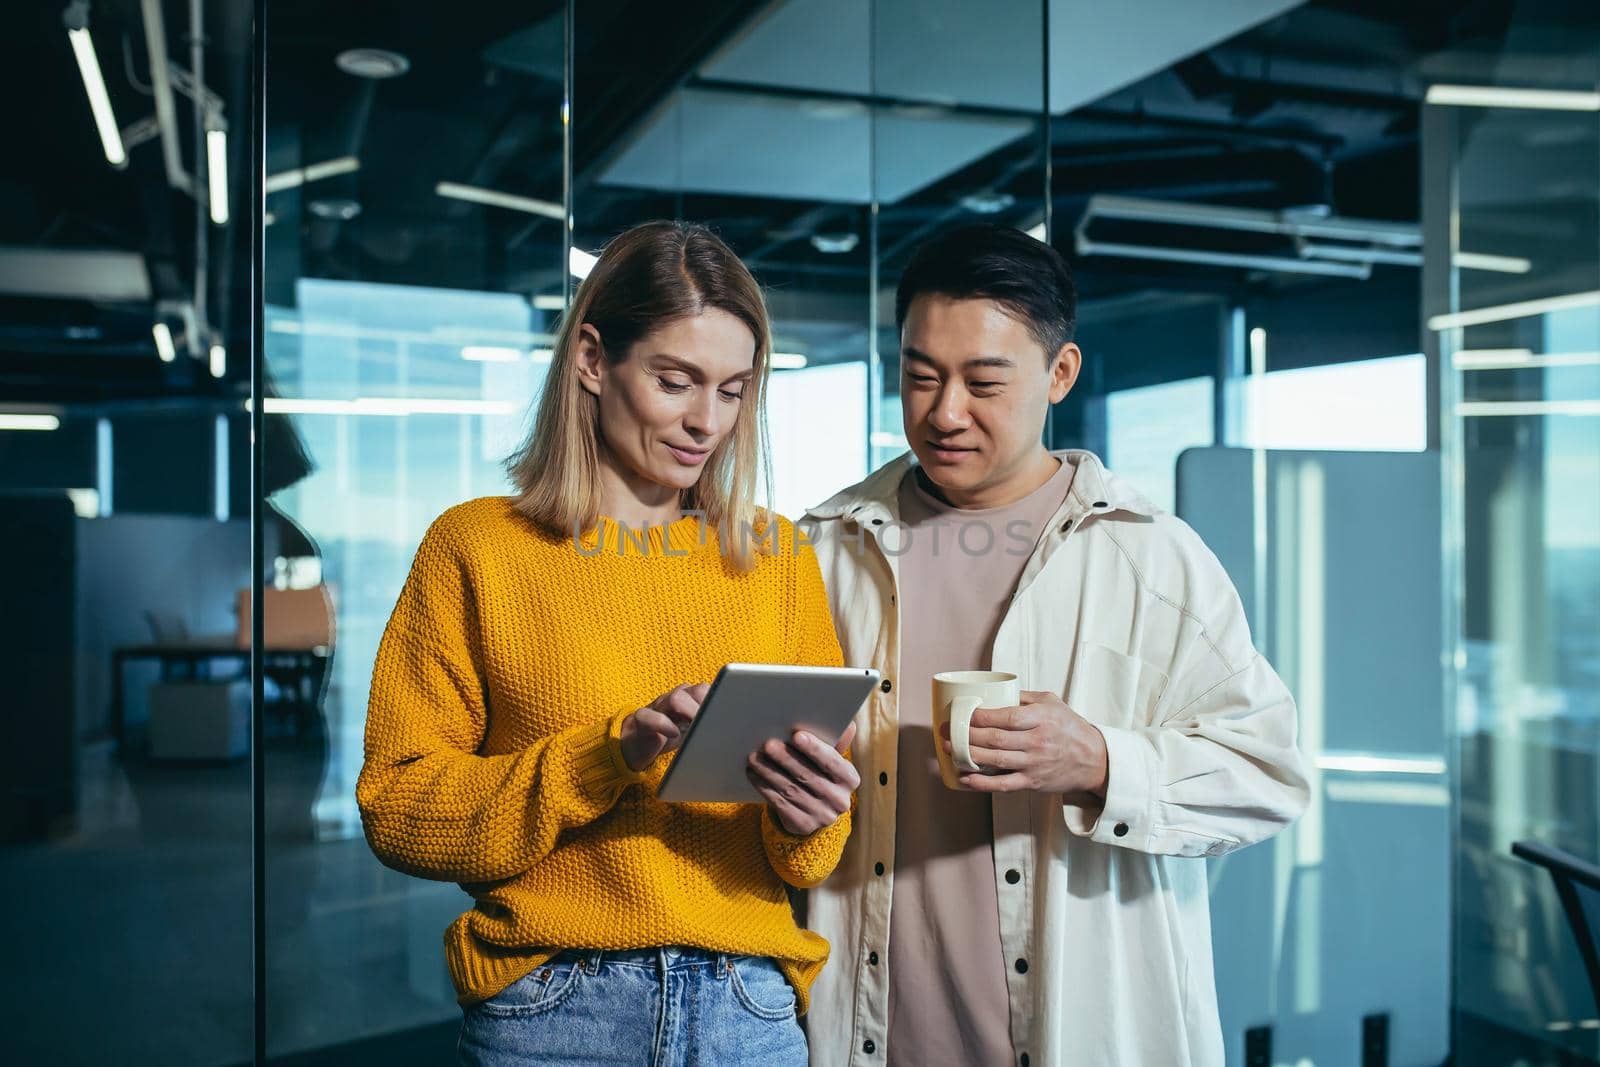 Two employees are having fun. during the break an Asian man and a blonde woman, colleagues work together in a modern office, look at a tablet computer together